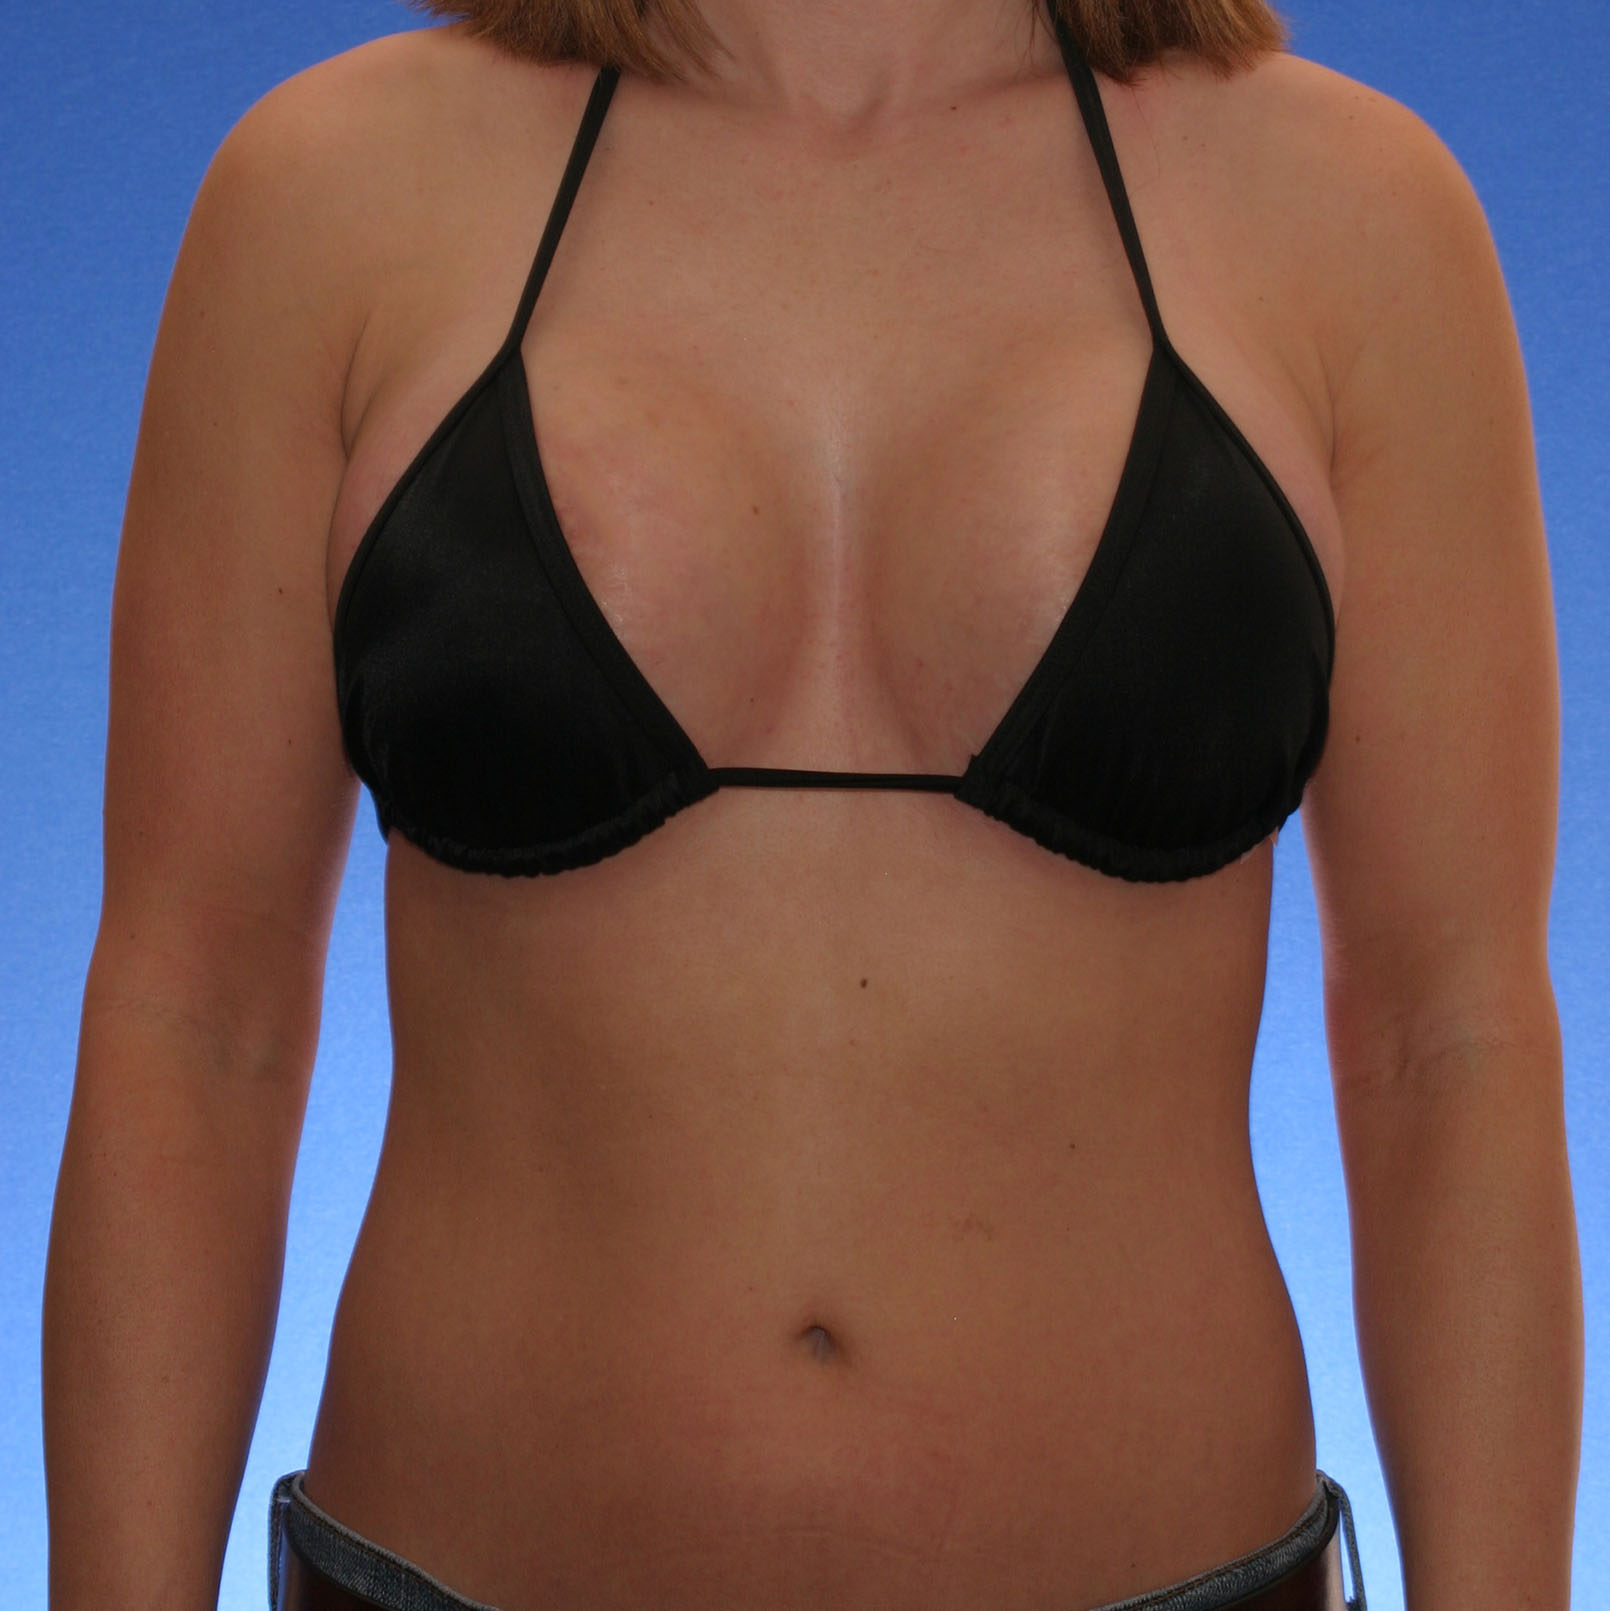 Breast Reduction DD to C Cup Before & After Photos, Newport Beach,  California (CA), Joseph T. Cruise, M.D., Board Certified Plastic Surgeons